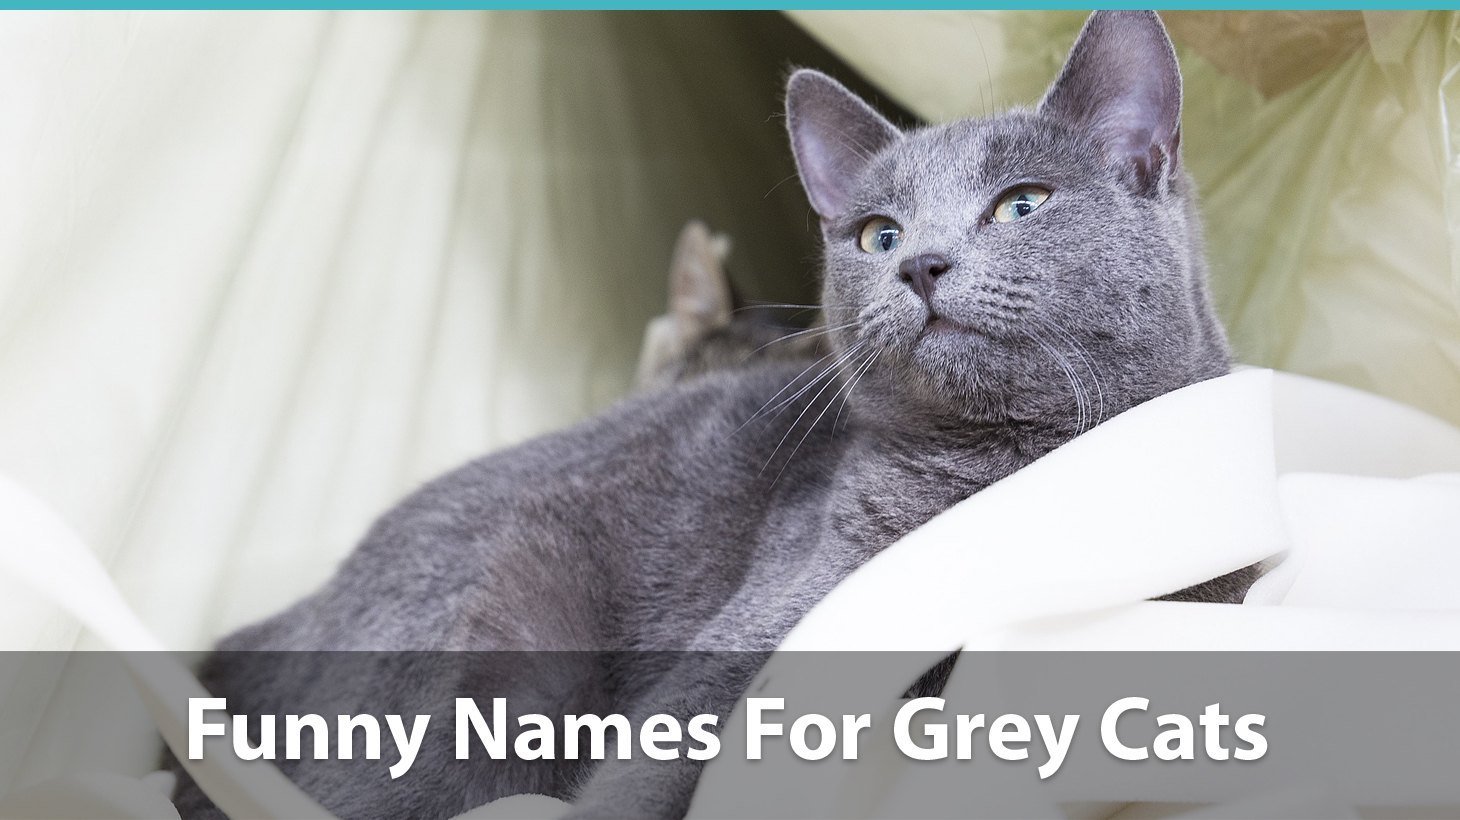 Top 120 Names For Grey Cats (Cute, Funny, Unique, Puns, Pop Culture Inspired And More Gray Cat Names)